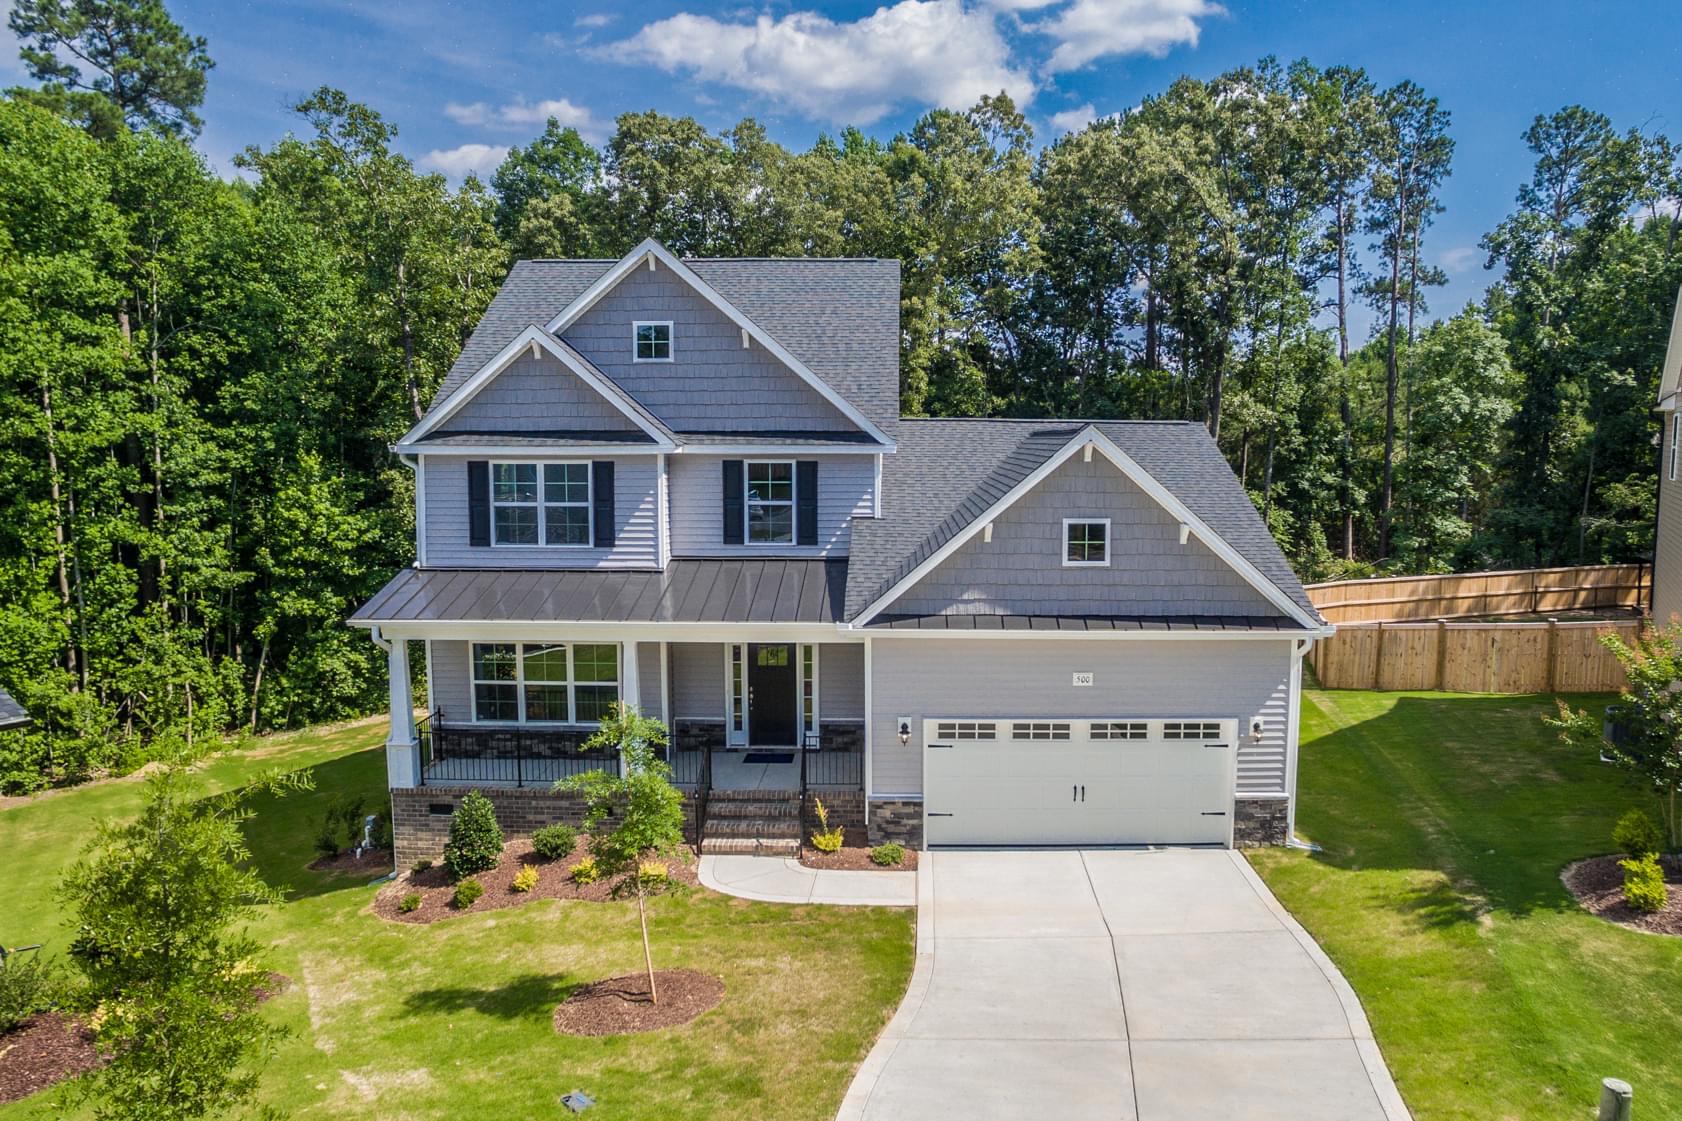 New Homes in Greenville, NC Turner Run from Caviness & Cates Communities